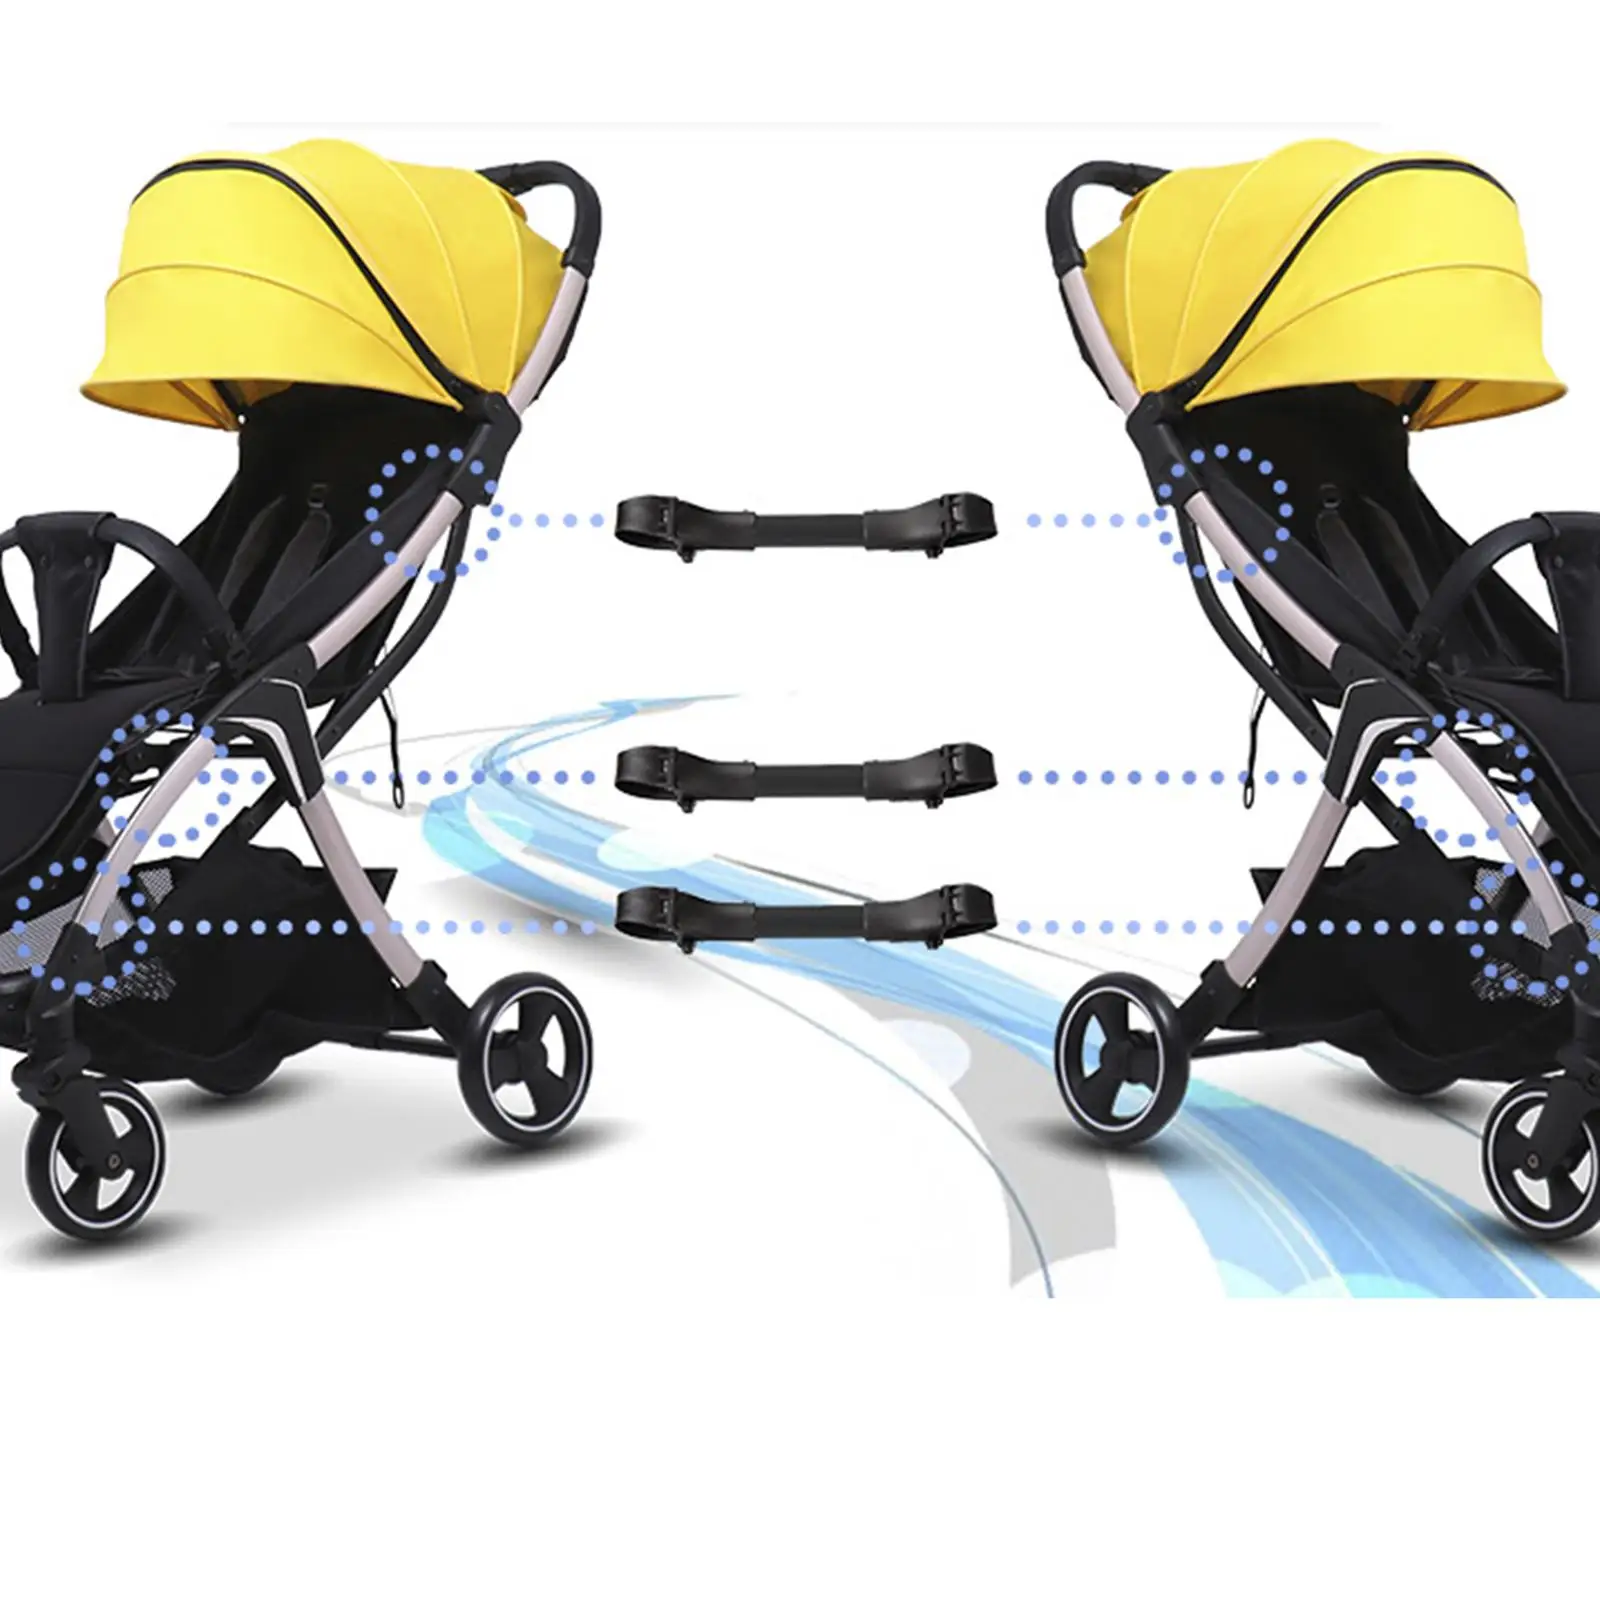 3x Twin Baby Stroller Connector Alluminum Alloy Side by Side Safety Attachment Black Secure Strap Linker Durable for Infant Cart